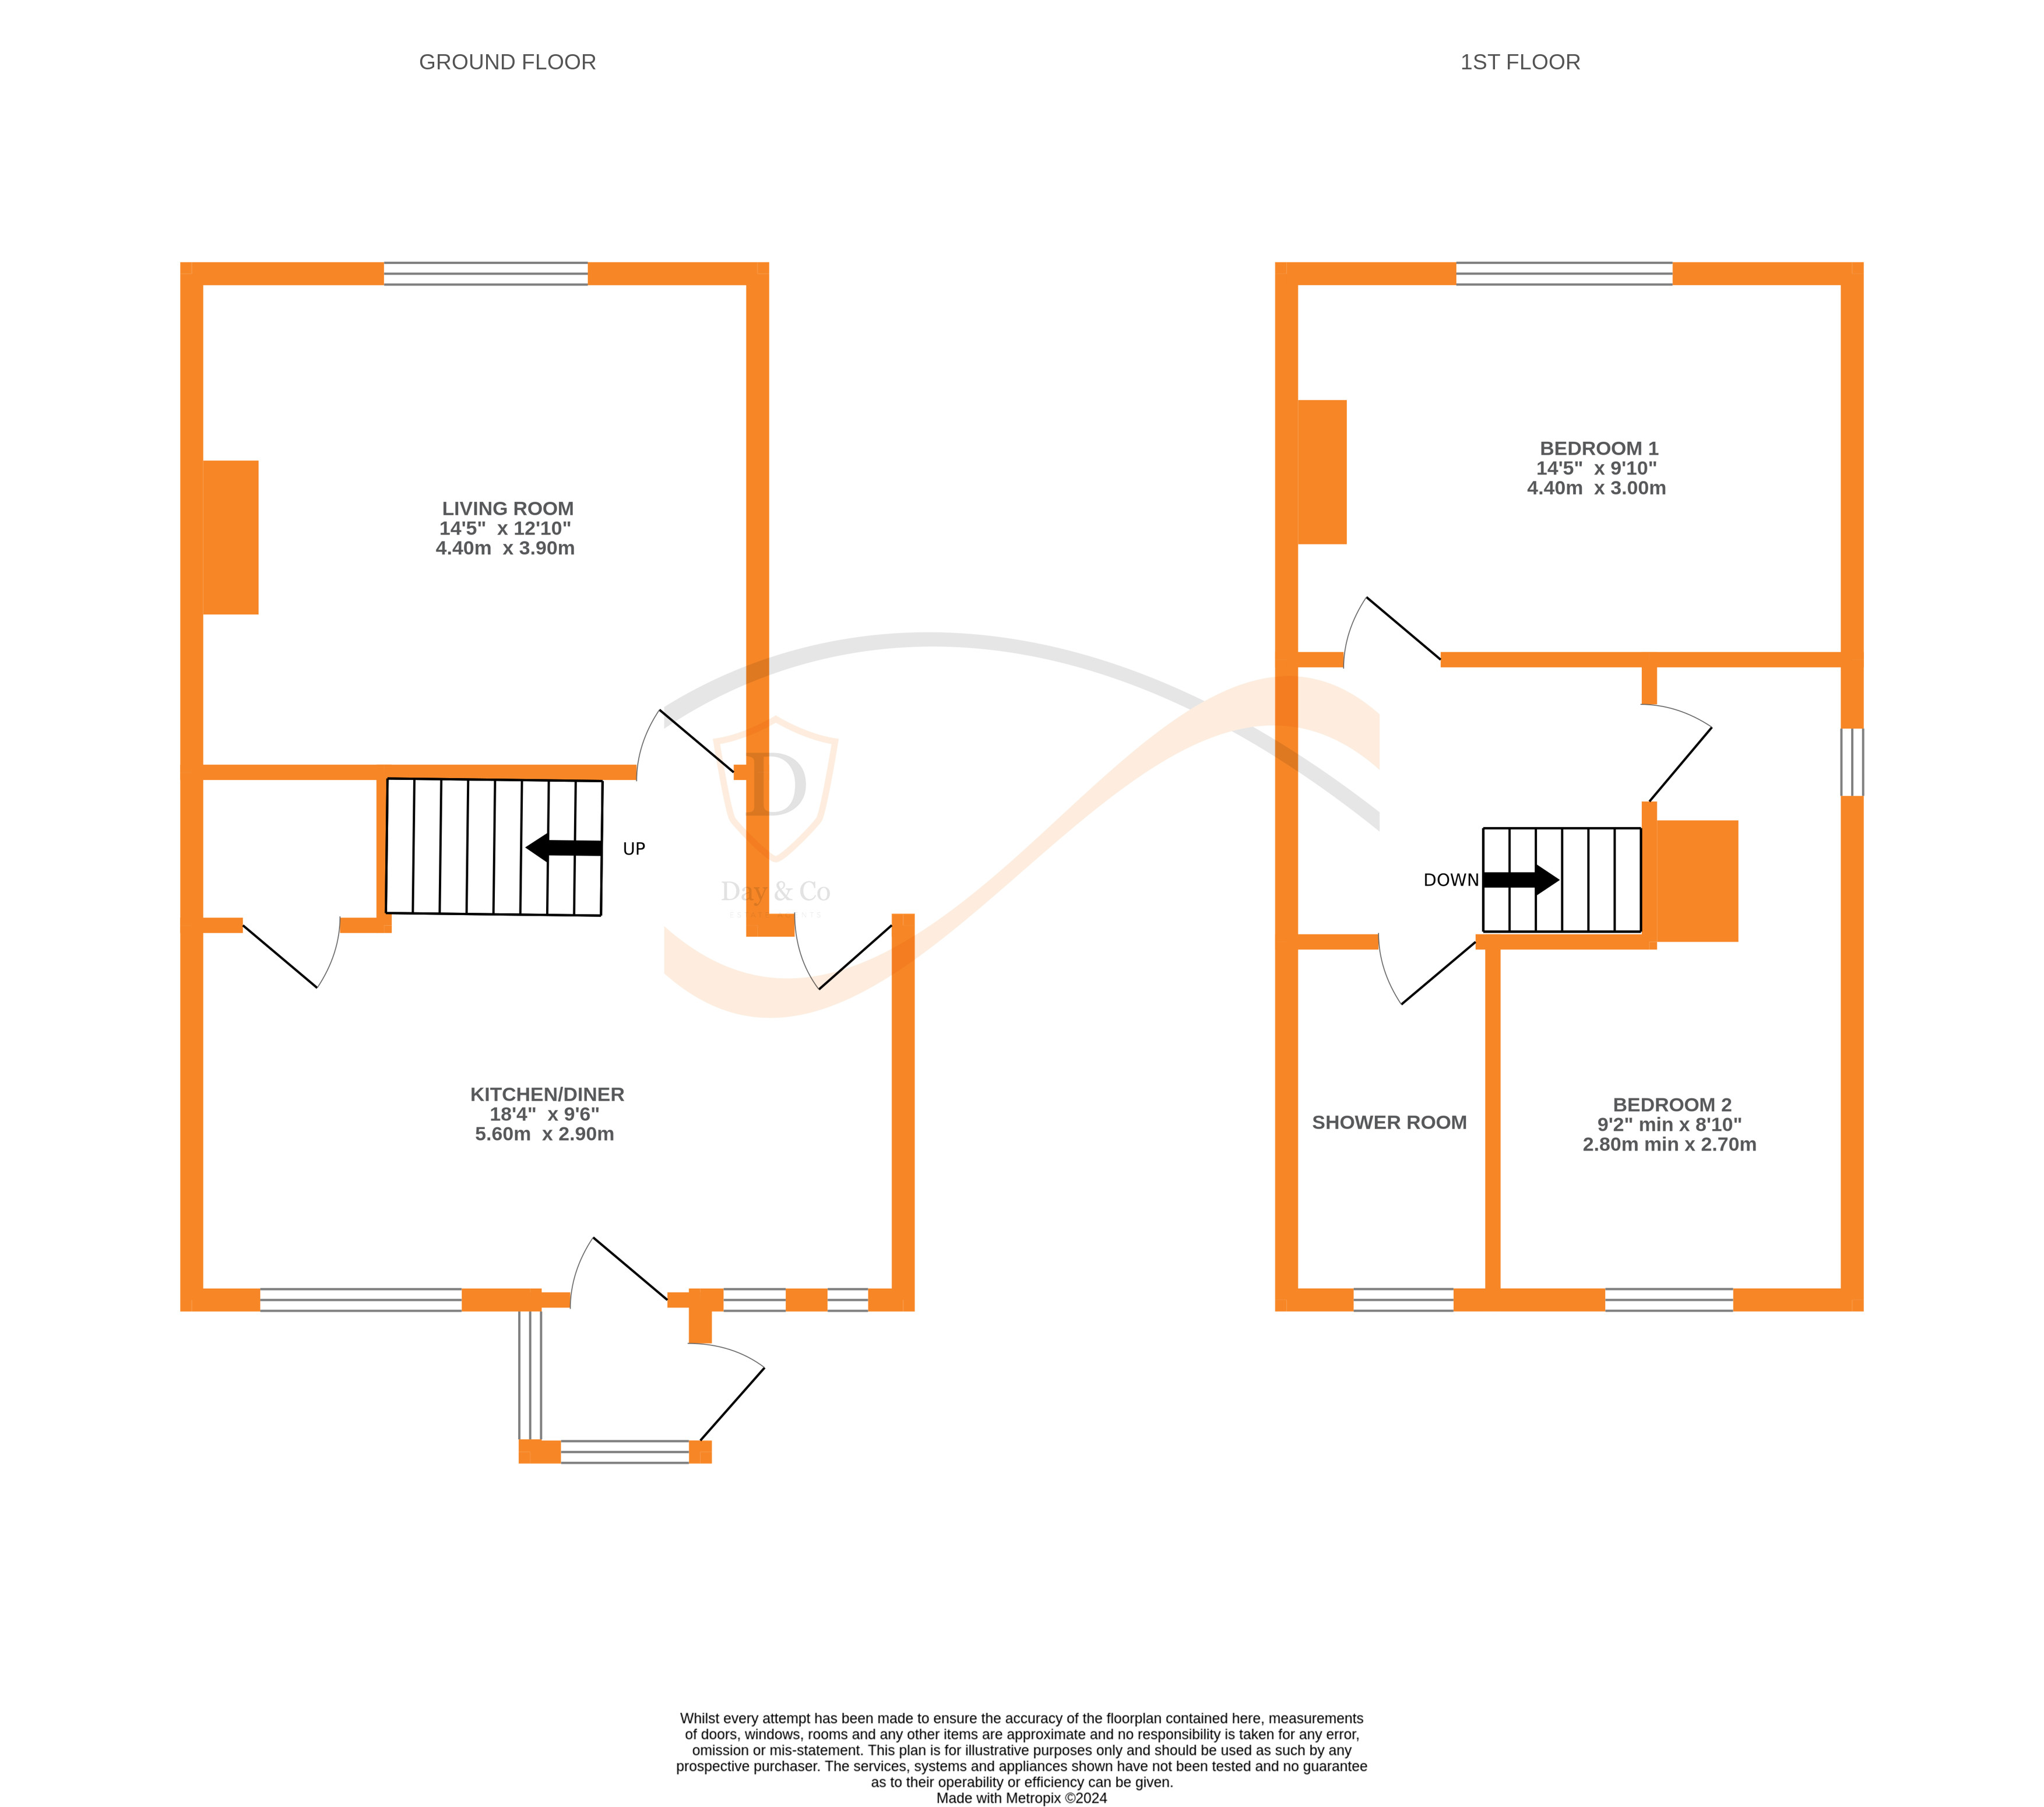 Floorplans For Riddlesden, Keighley, West Yorkshire